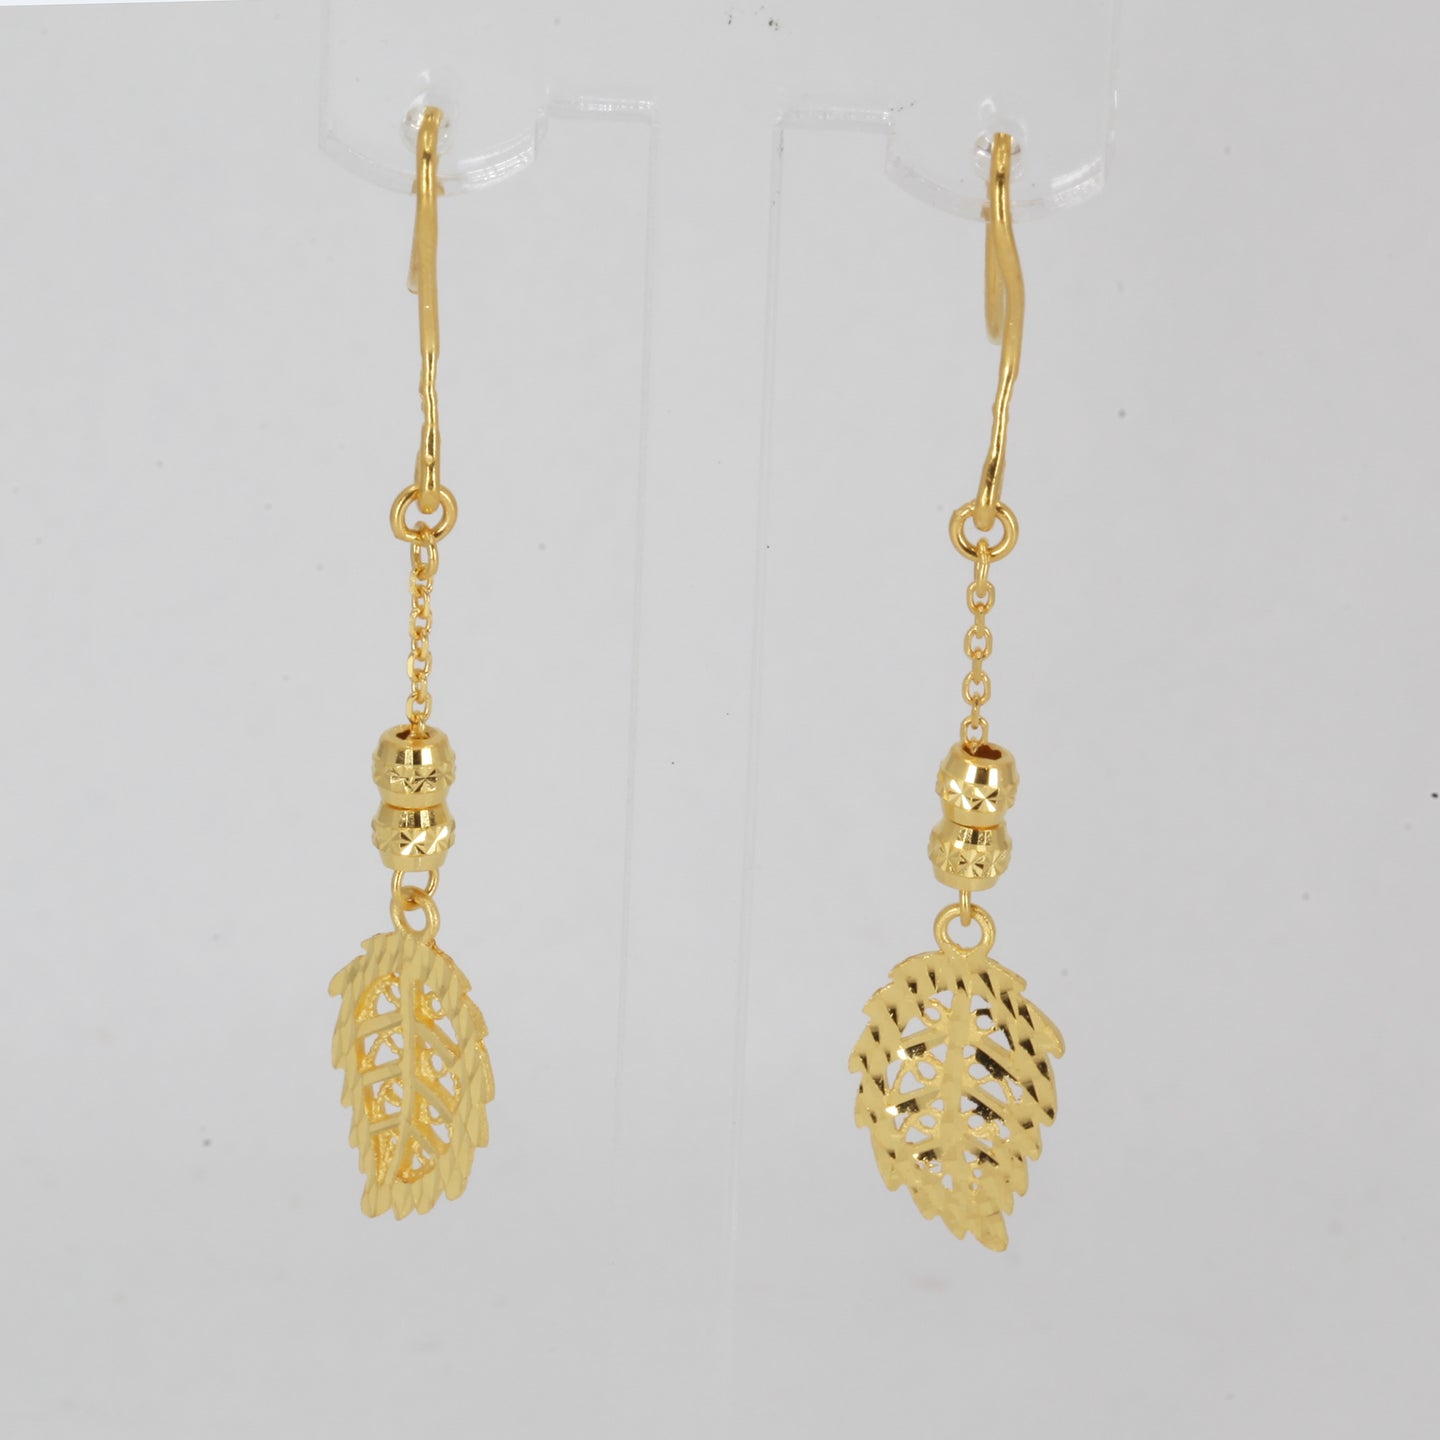 24K Solid Yellow Gold Leaf Hanging Earrings 4.1 Grams